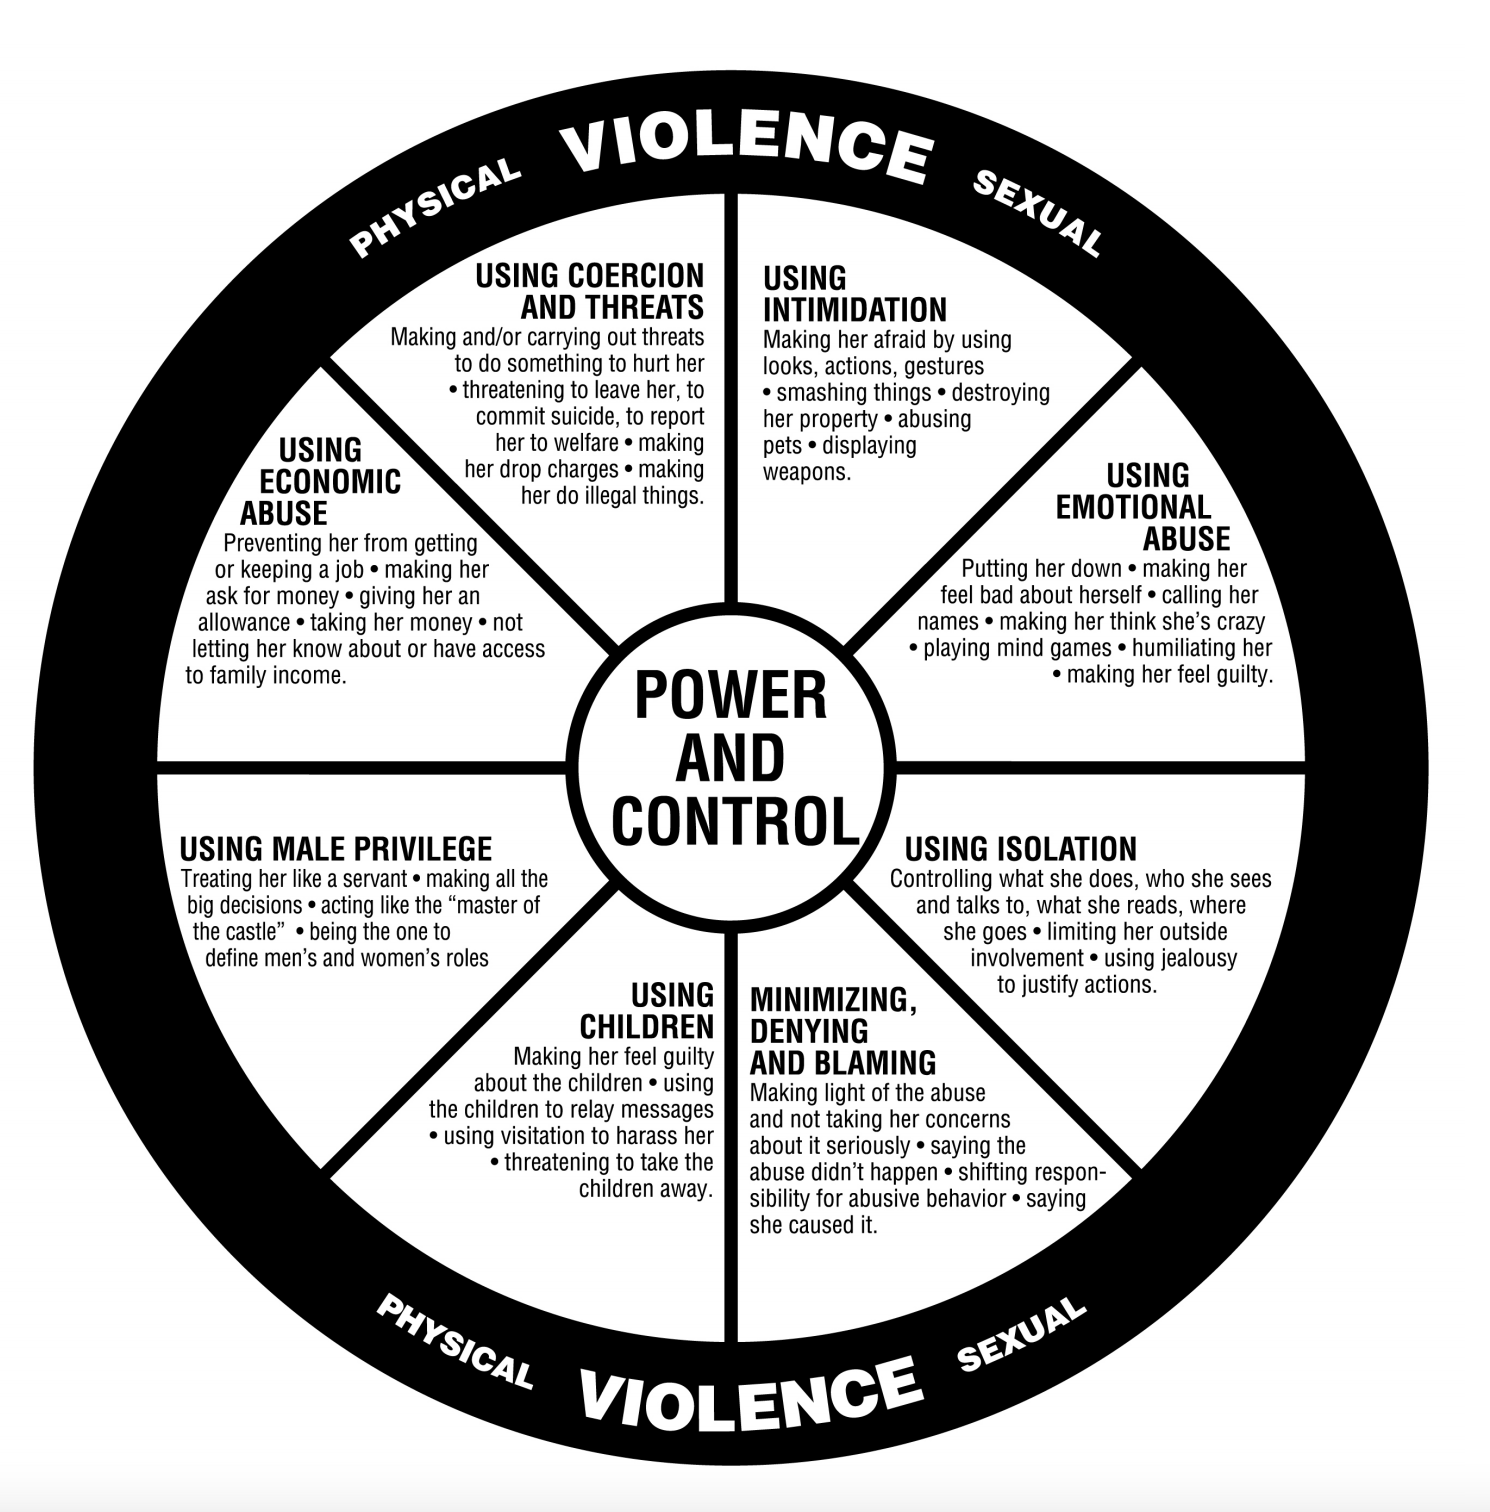 The Duluth Model Wheel of Power And Control - identifying the tactics abusers use to control and manipulate their victims